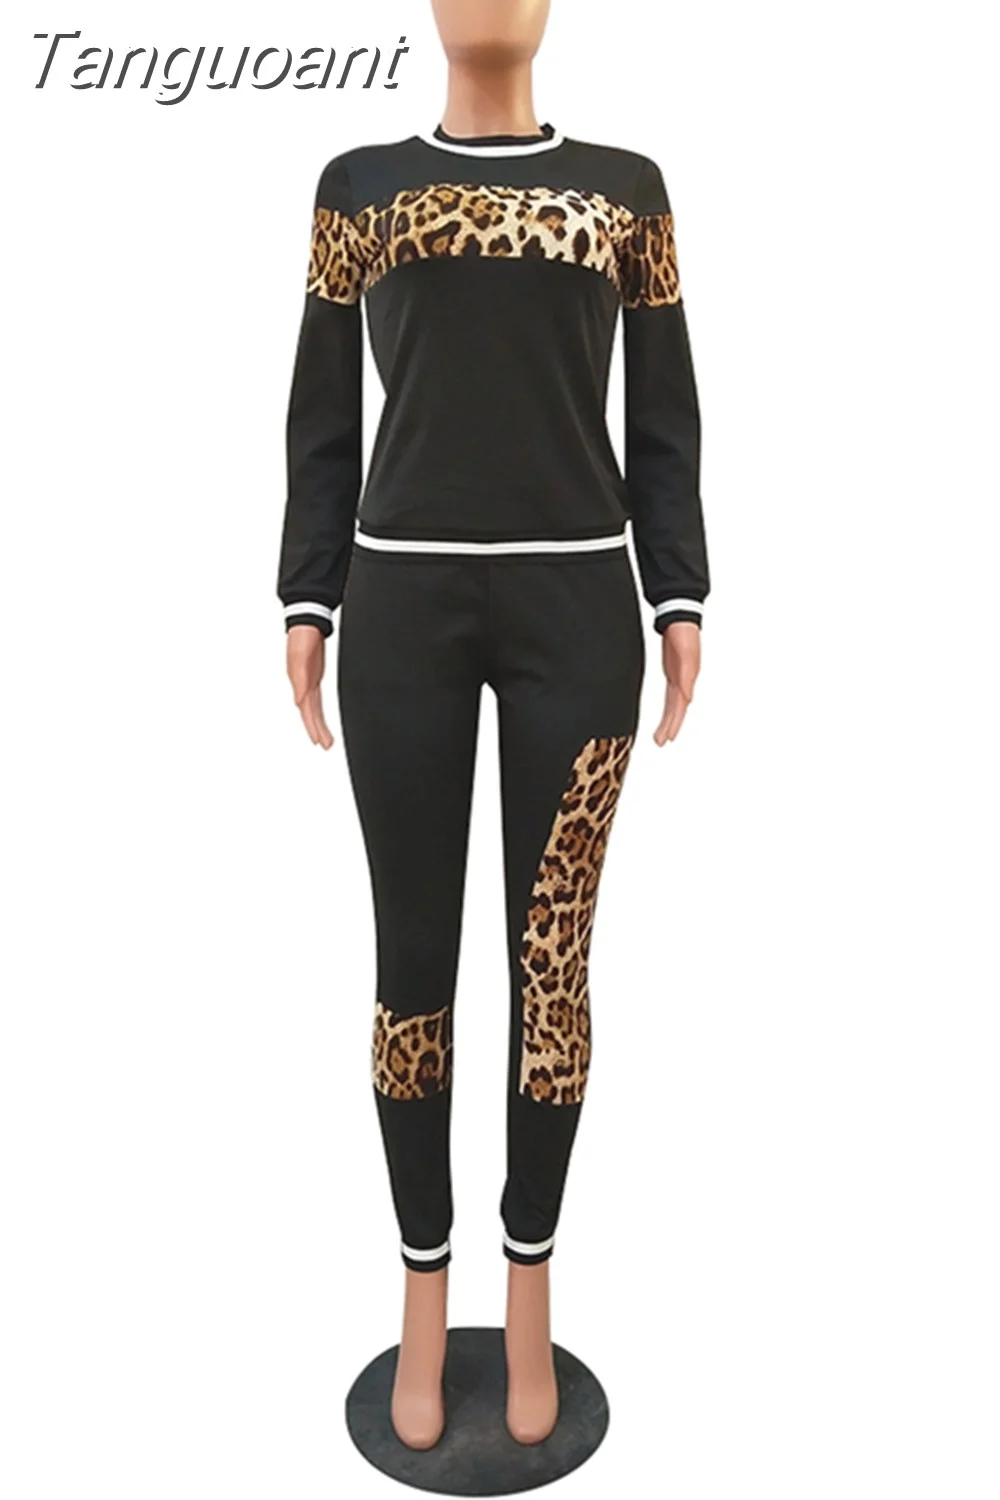 Tanguoant Leopard Camouflage Two Pieces Set Women's Sports Suit Long Sleeve Sweatshirt and Sweatpants Casual Tracksuit Jogging Femme